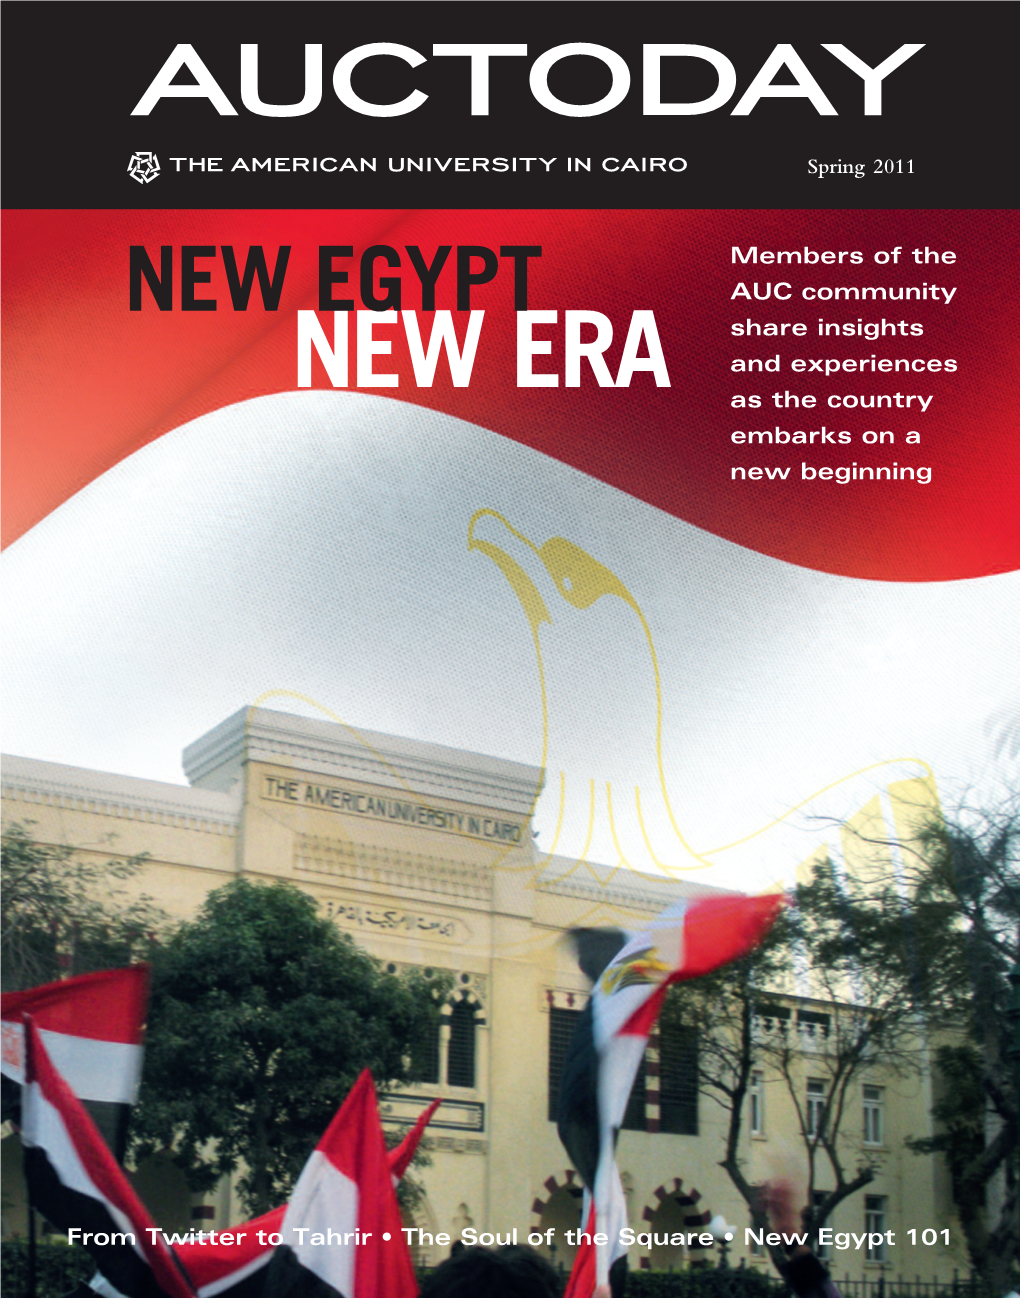 NEW EGYPT AUC Community Share Insights NEW ERA and Experiences As the Country Embarks on a New Beginning